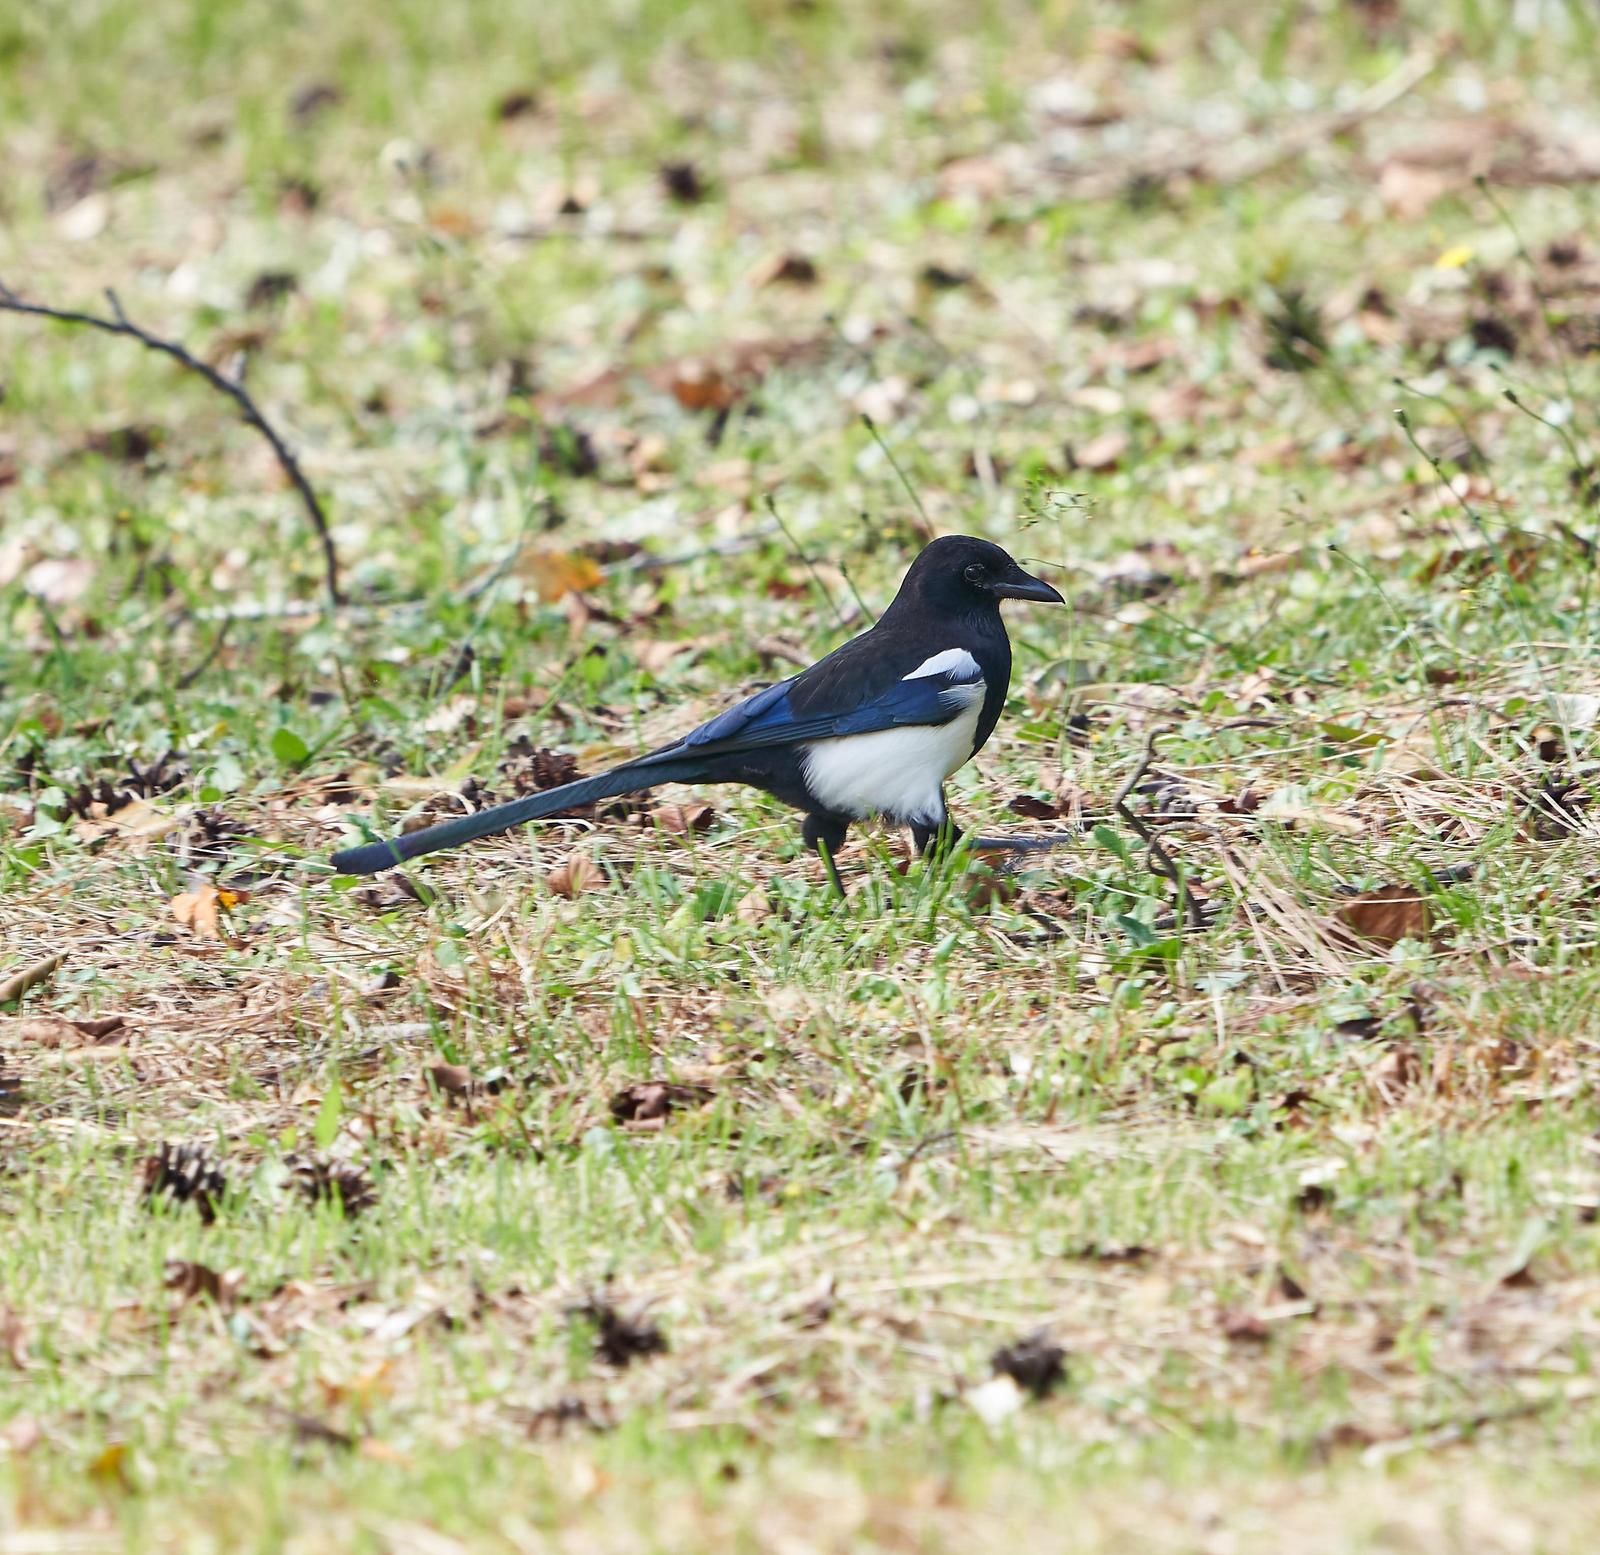 Oriental Magpie Photo by Steven Cheong